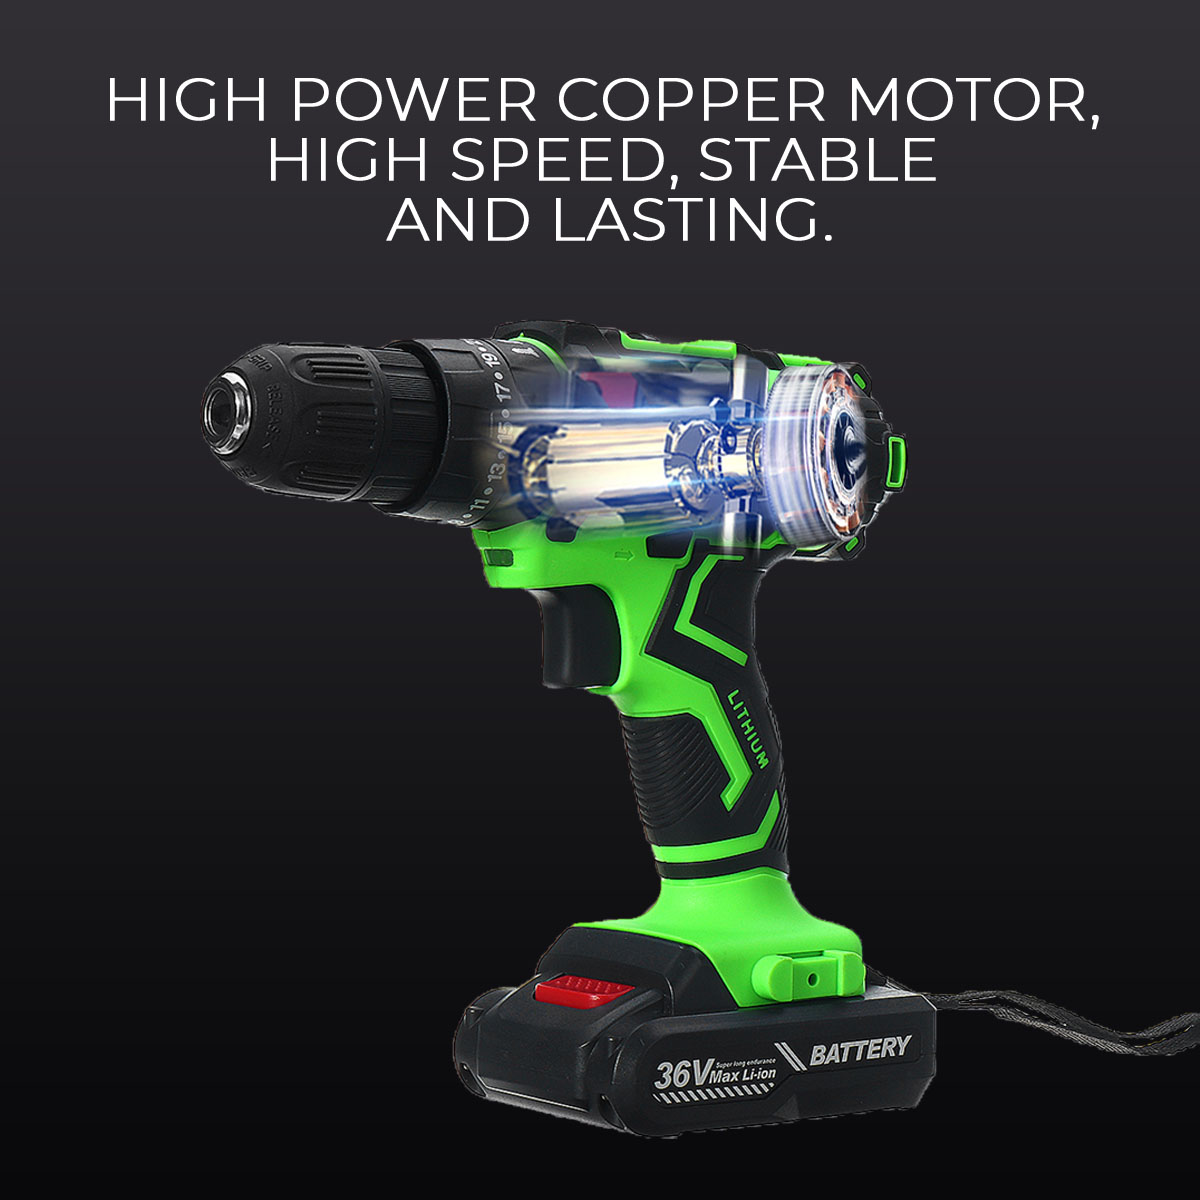 36V-Electric-Hand-Drill-Driver-253-Torque-Setting-Power-Drilling-DIY-Work-W-1-Or-2-Li-ion-battery-1582717-7